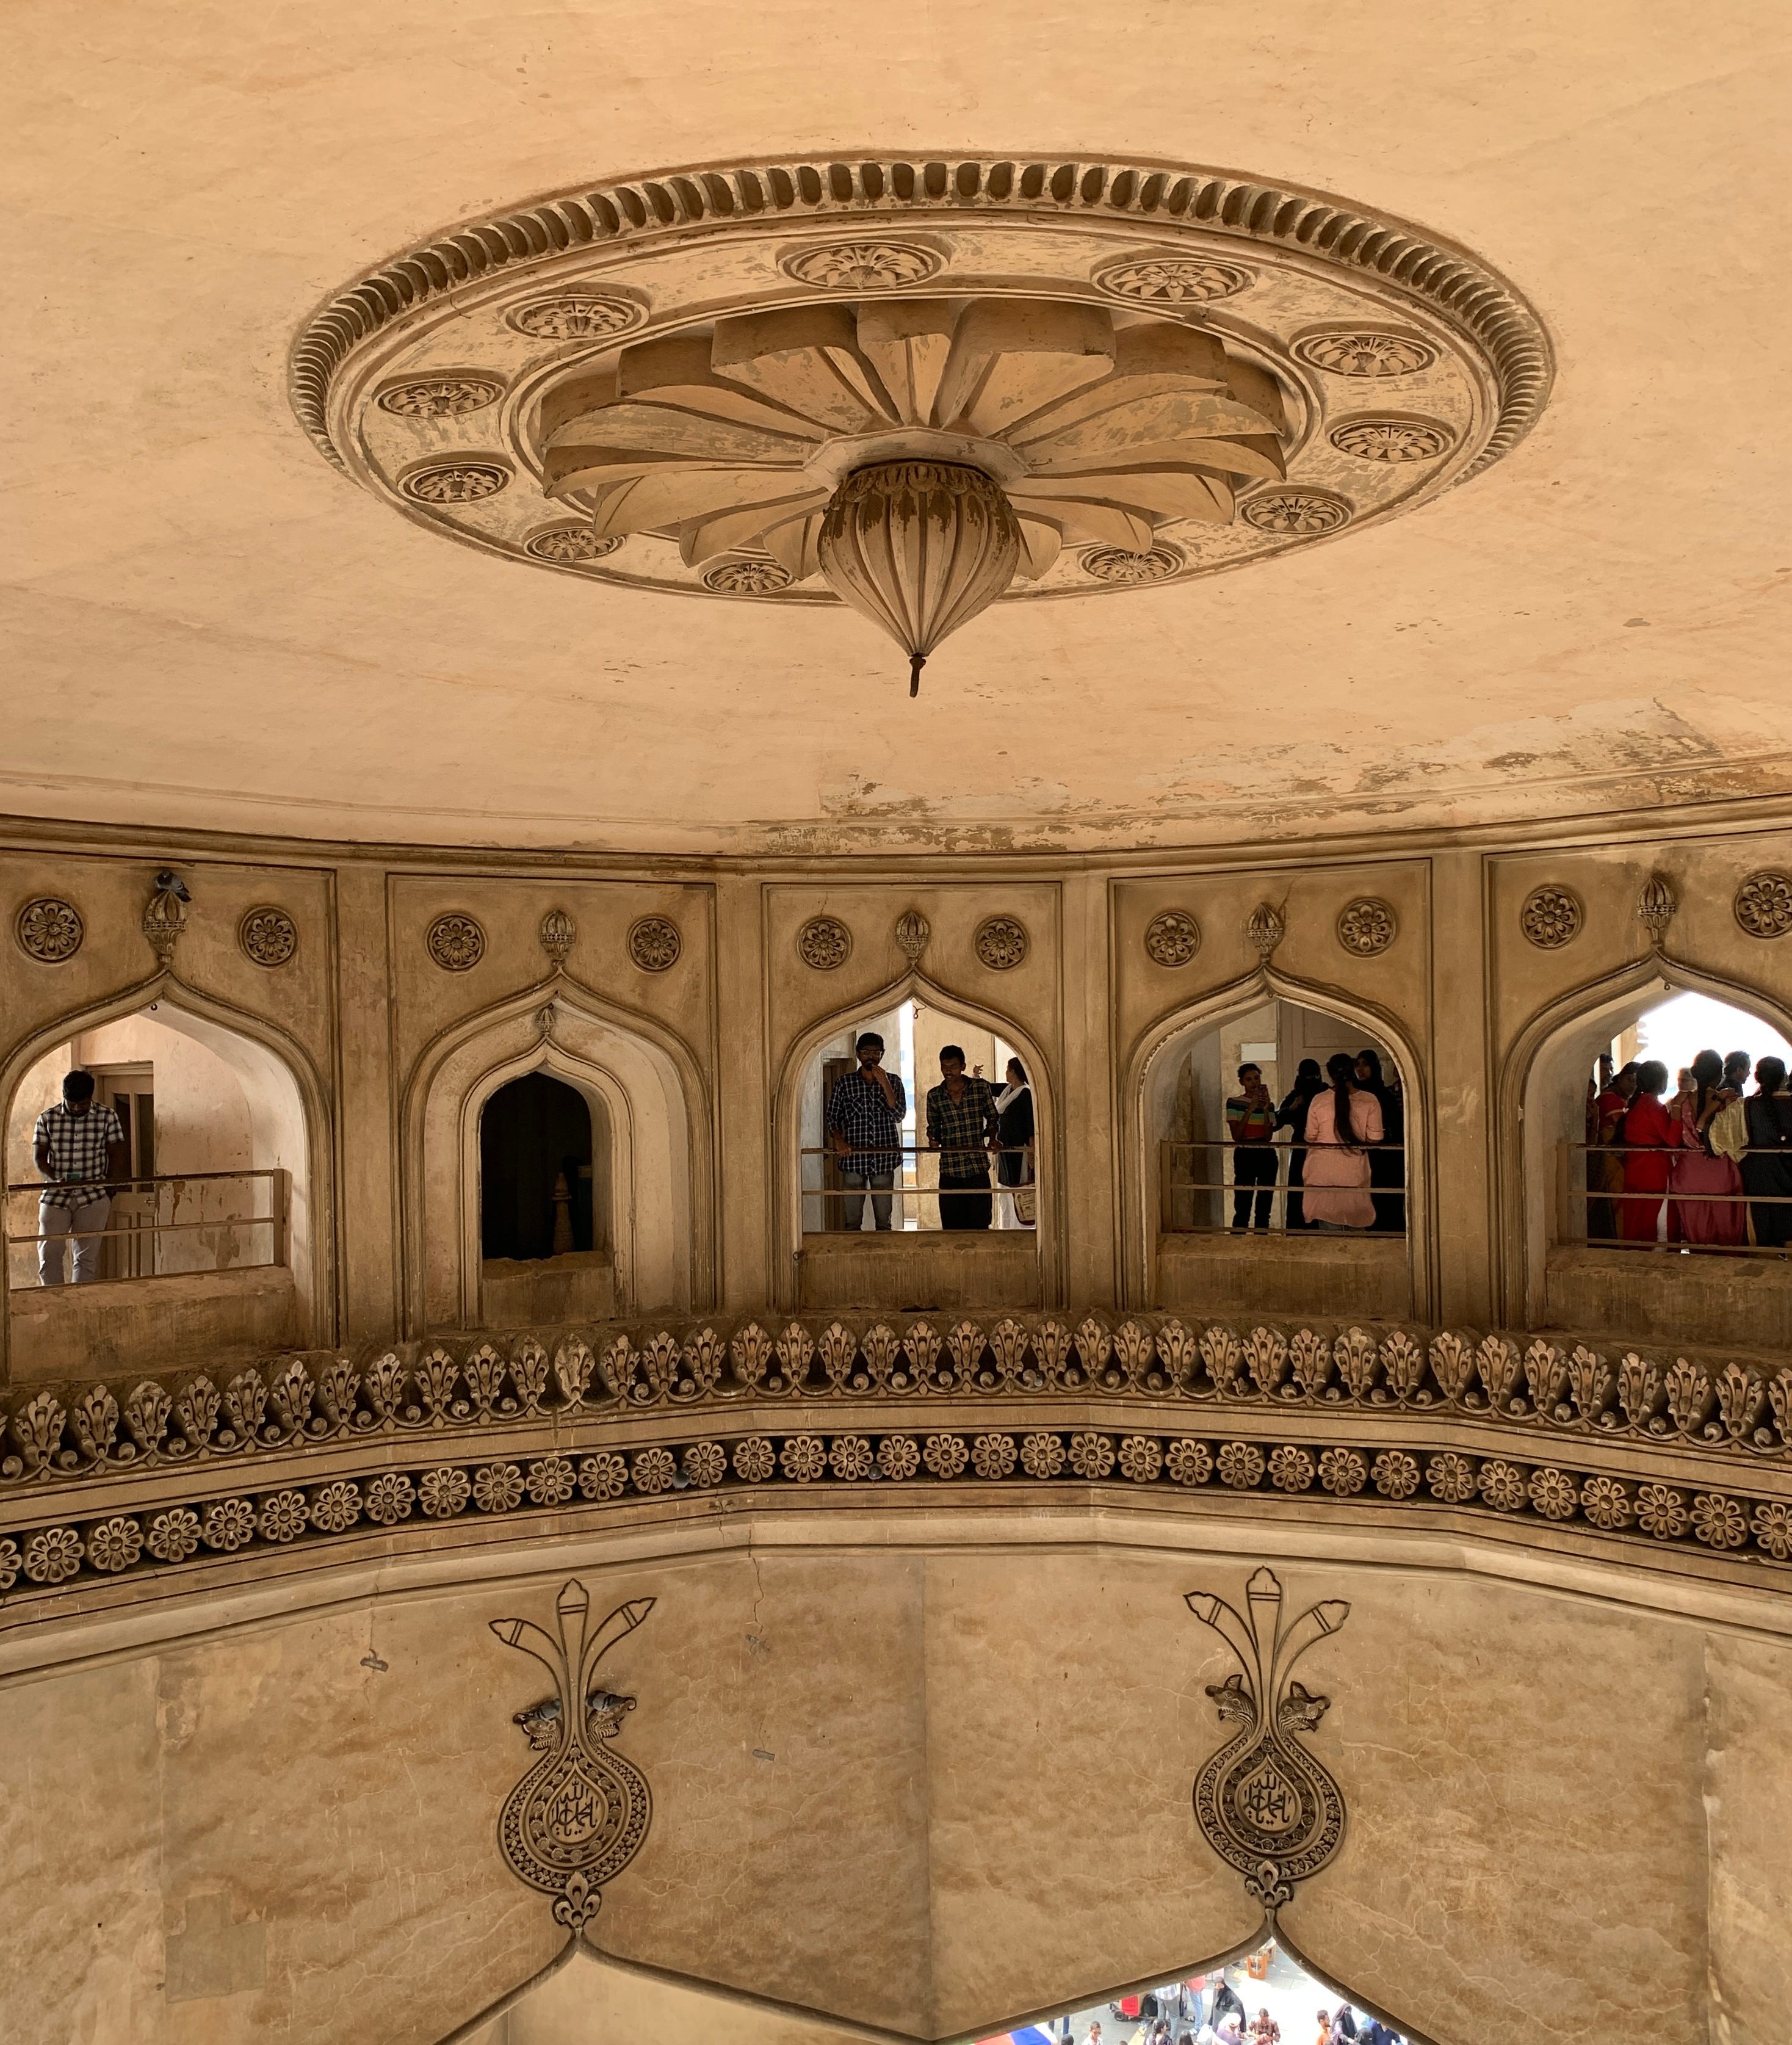 A circular section inside Charminar with windows on all sides, and an ornate ceiling.